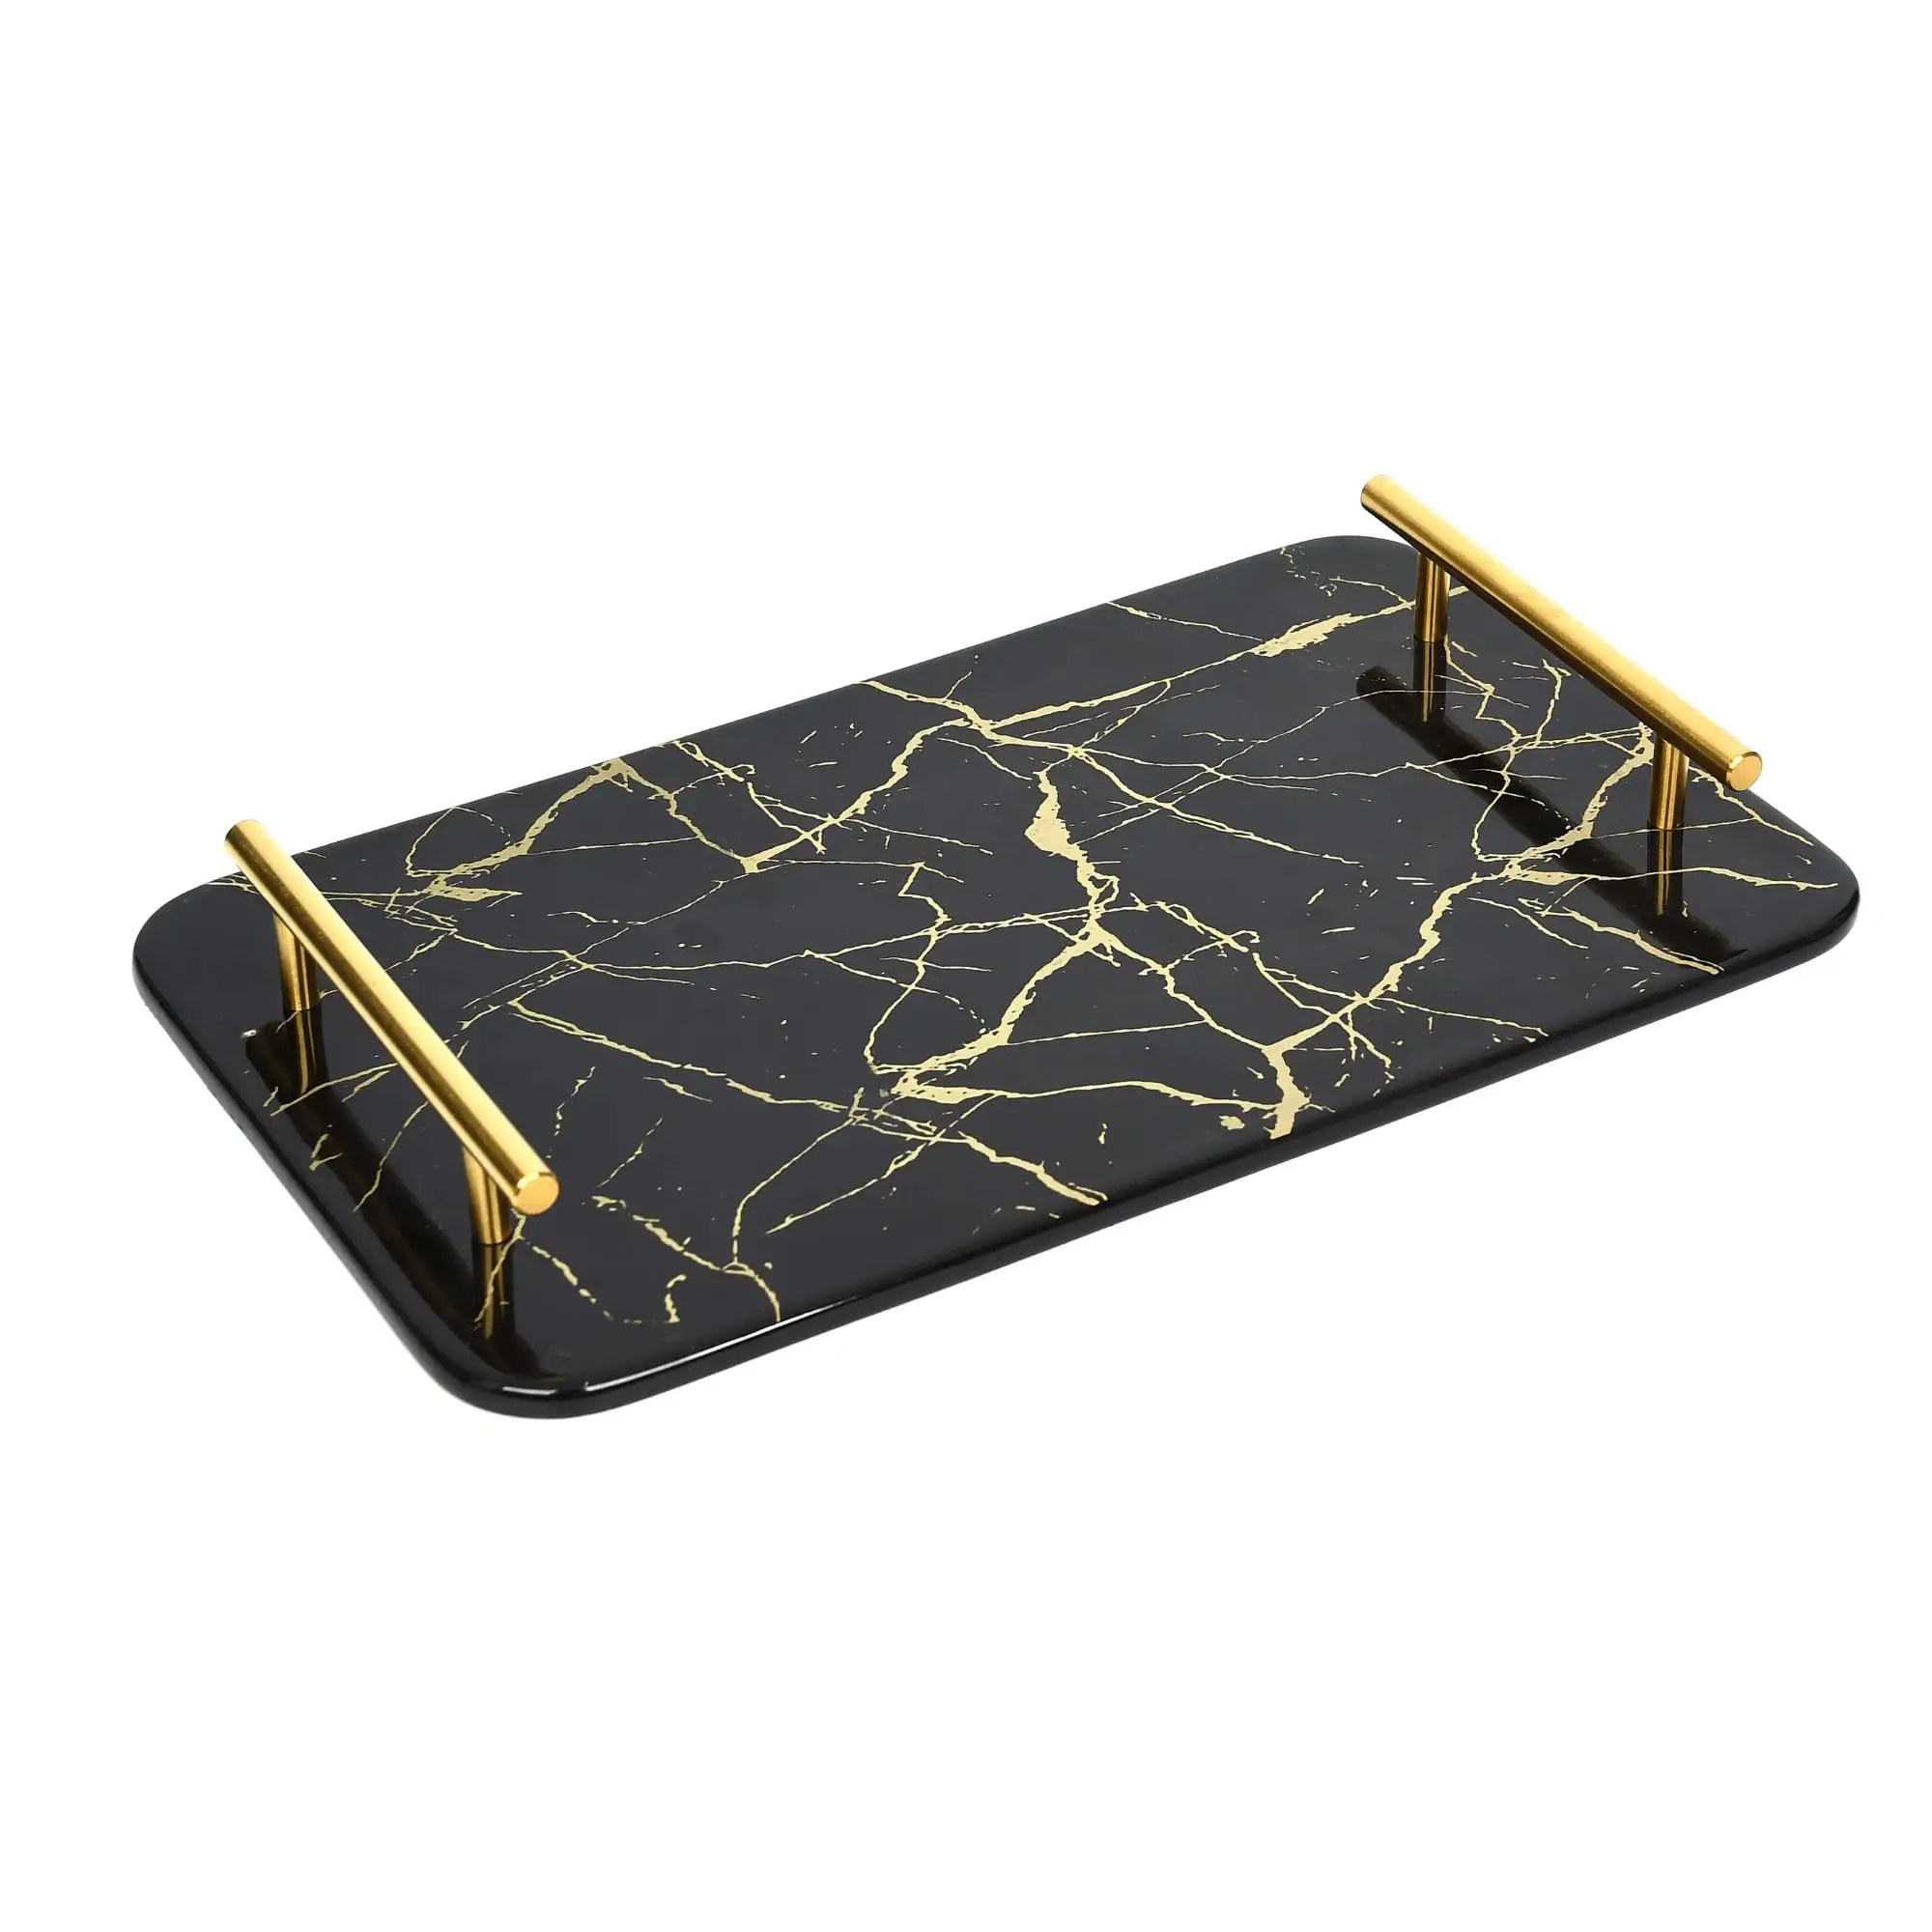 Hot selling Marble & Metal Rectangle Shape Serving Tray For Home Wedding Decorative At Wholesale Price From India